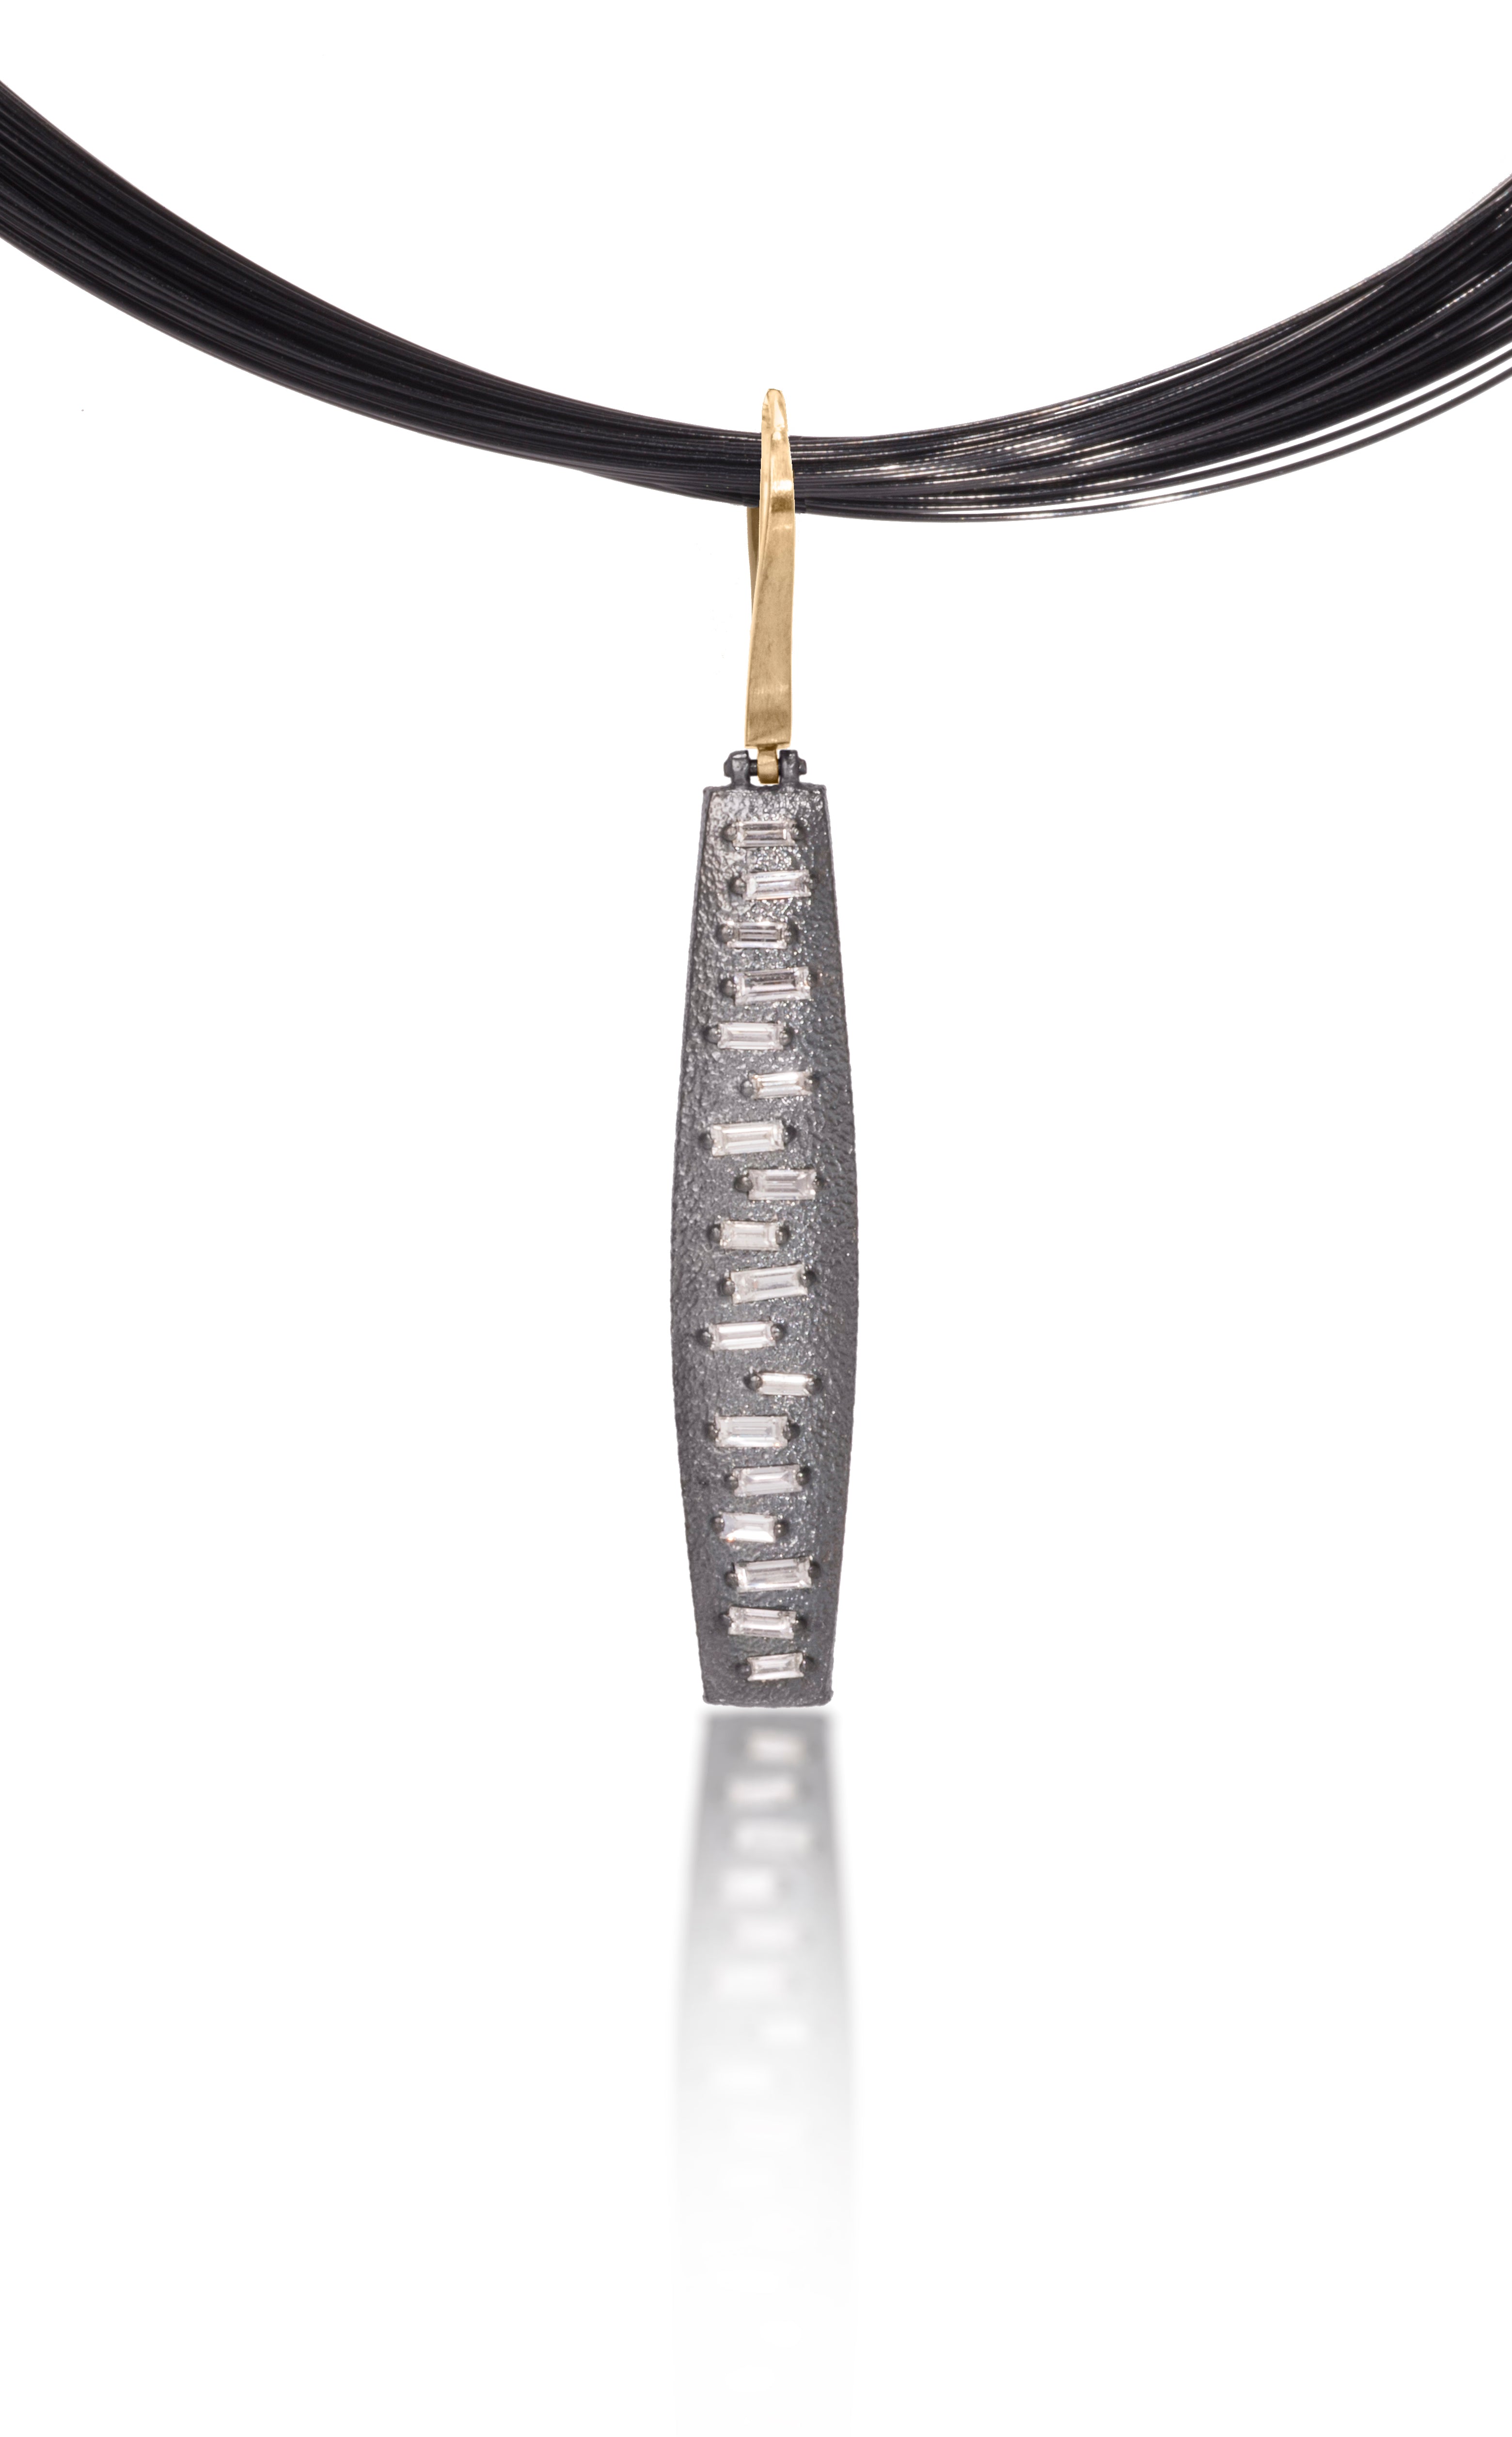 This hinged pendant features a graceful, curved and tapered form. The playful irregularity of the baguette angles catch the light in dynamic ways when worn. Design is offered in four richly textured color ways, oxidized sterling, oxidized sterling/18k gold, 18k gold and palladium. 0.555 tcw.